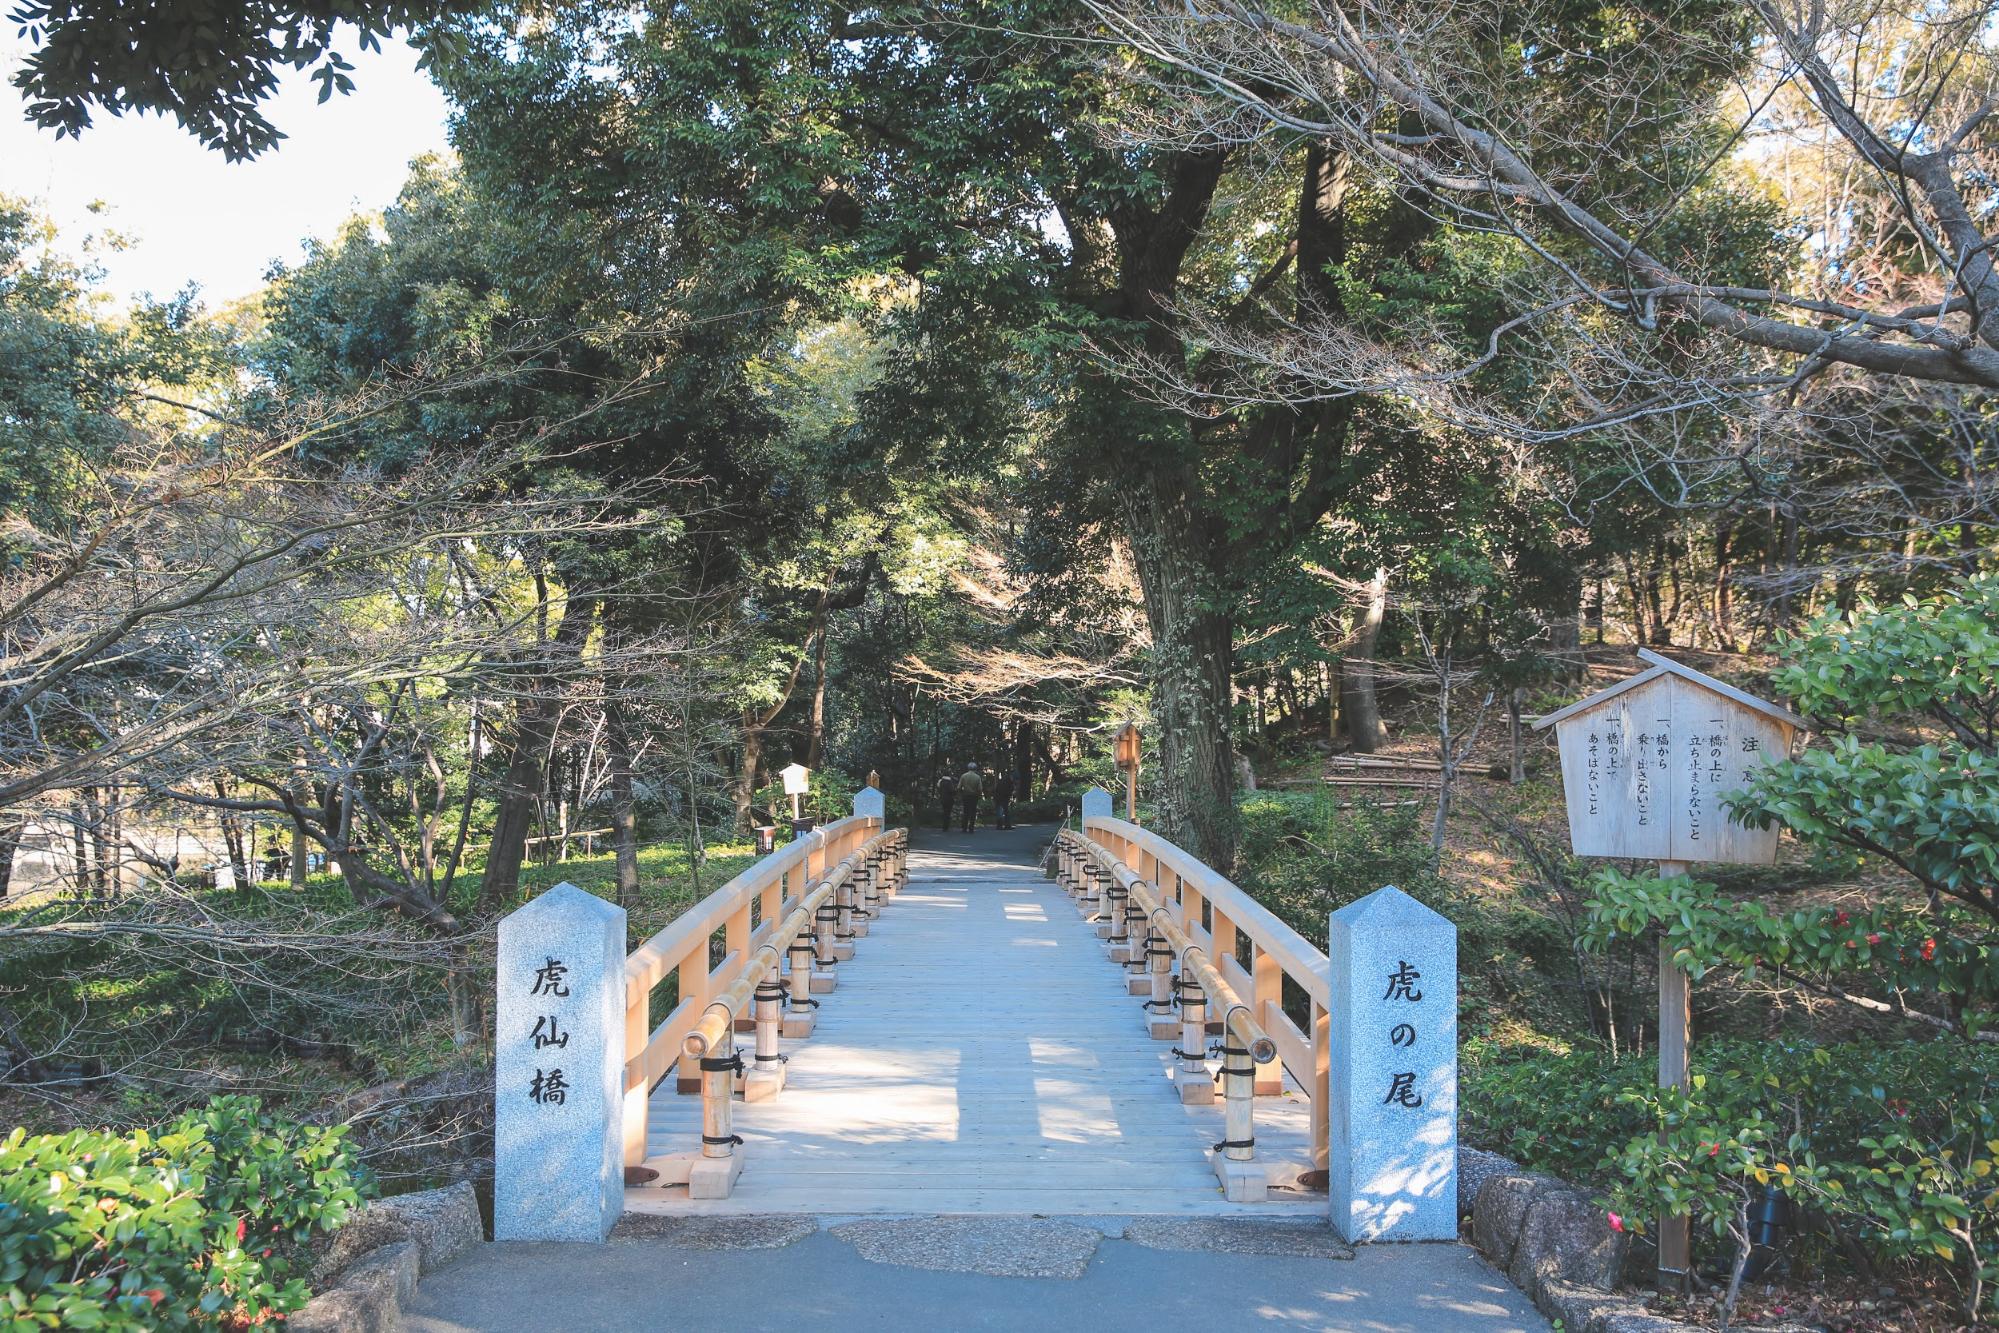 A wooden bridge made of cypress over the &quot;Tora no O&quot; (tail of the tiger).